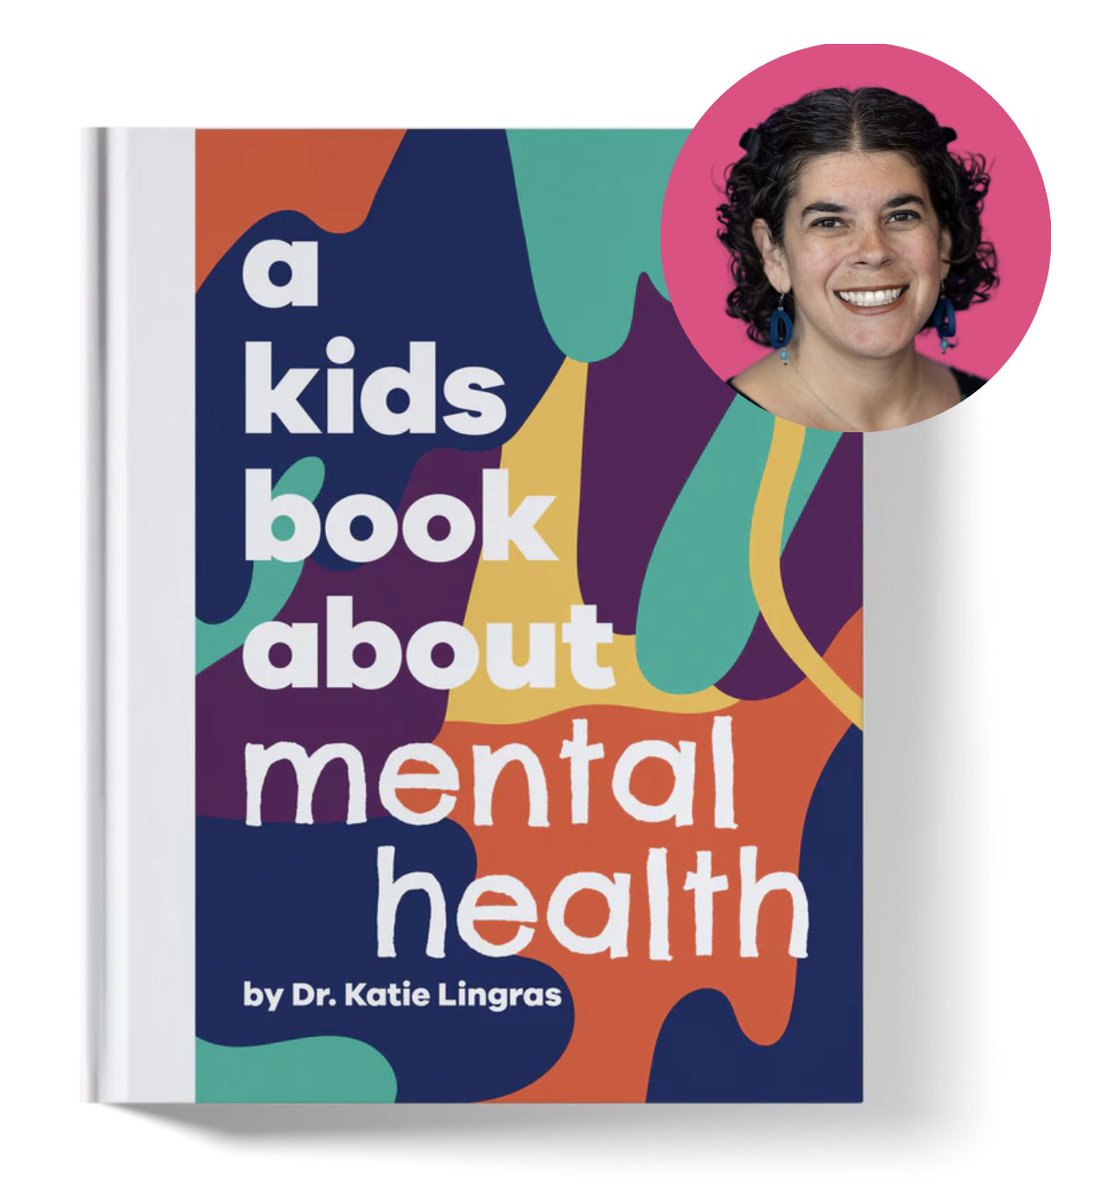 We are delighted to announce the release of faculty member Dr. Katie Lingras' new children's book, A Kids Book About Mental Health! Get your copy at 📷 A Kids Co. or 📷 Bookshop.org, and feel free to leave a review on Amazon or Barnes & Noble!